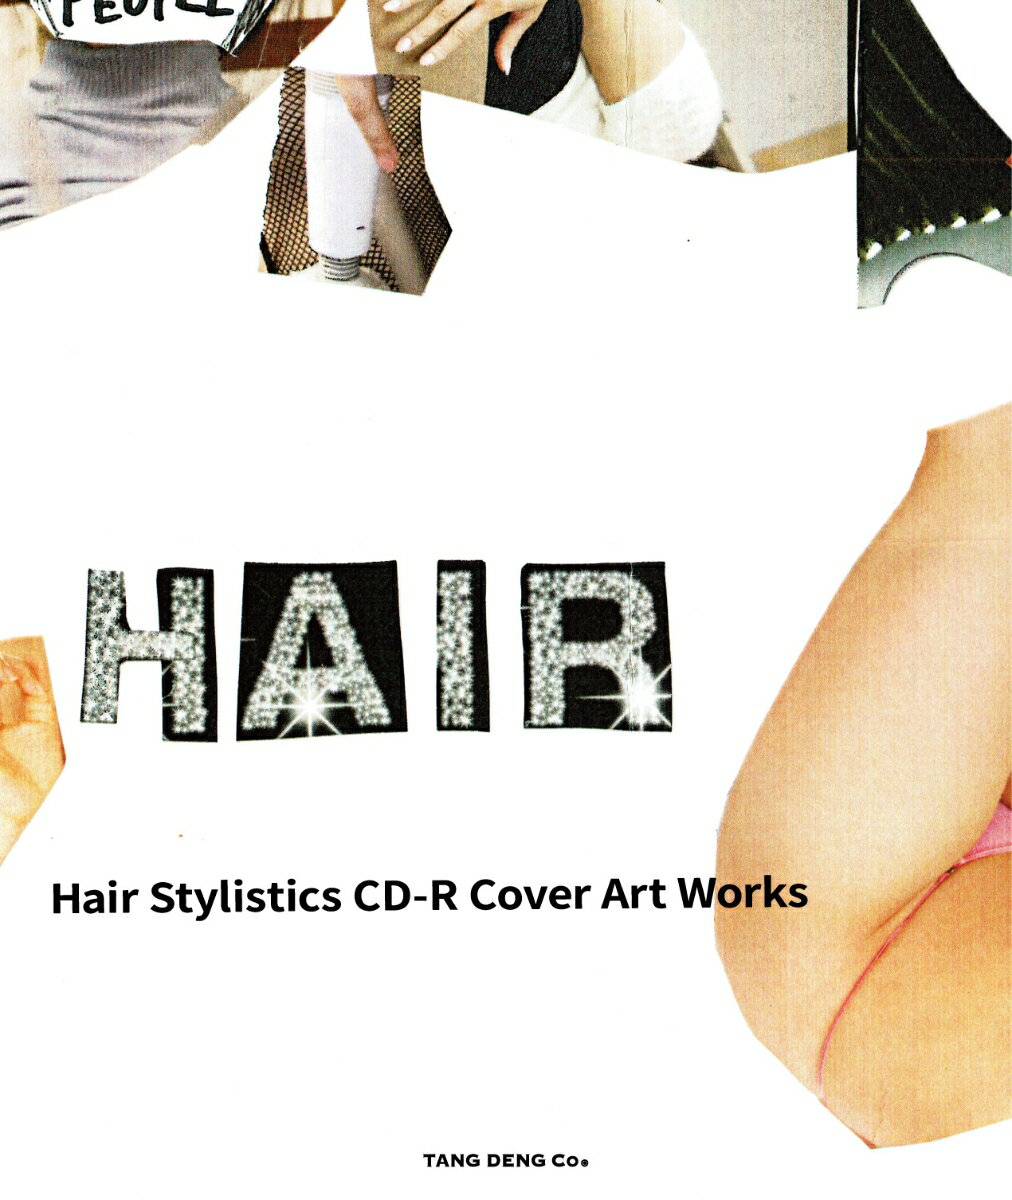 ”Hair Stylistics CD-R Cover Art Works” BOOK WITH CD ”BEST!”